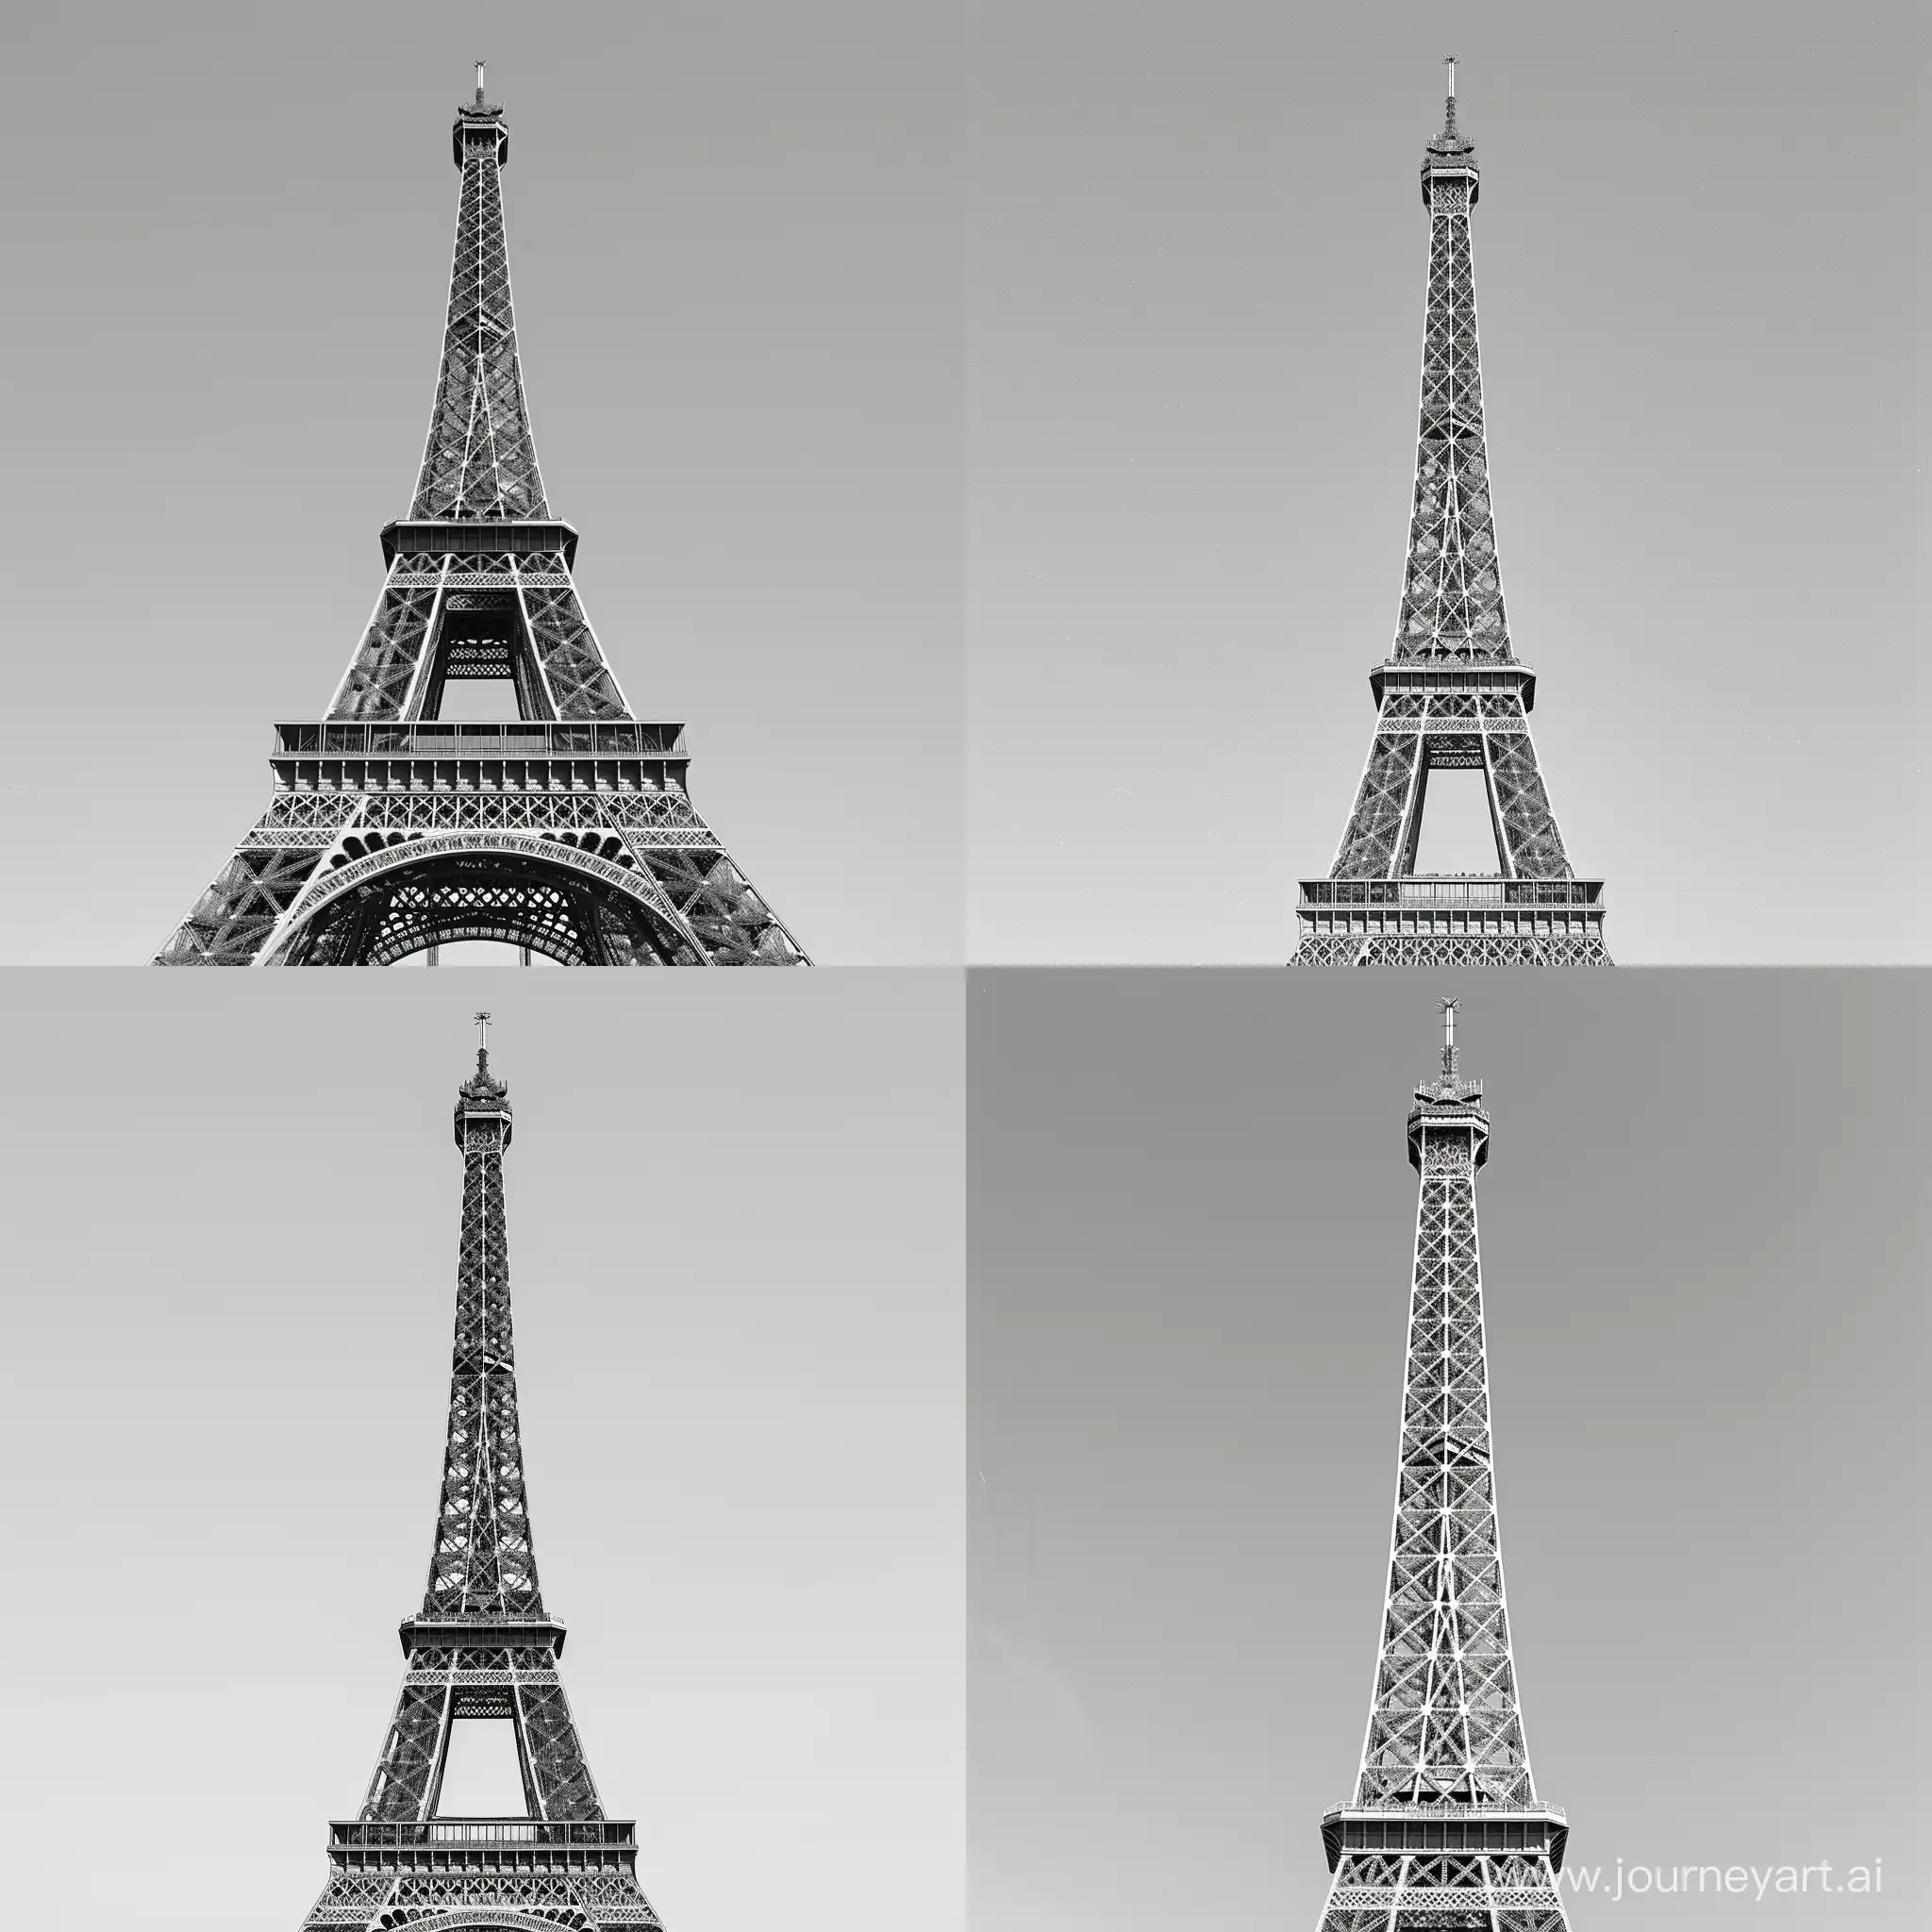 Stylish-Black-and-White-Photo-of-Eiffel-Tower-Against-Gray-Background